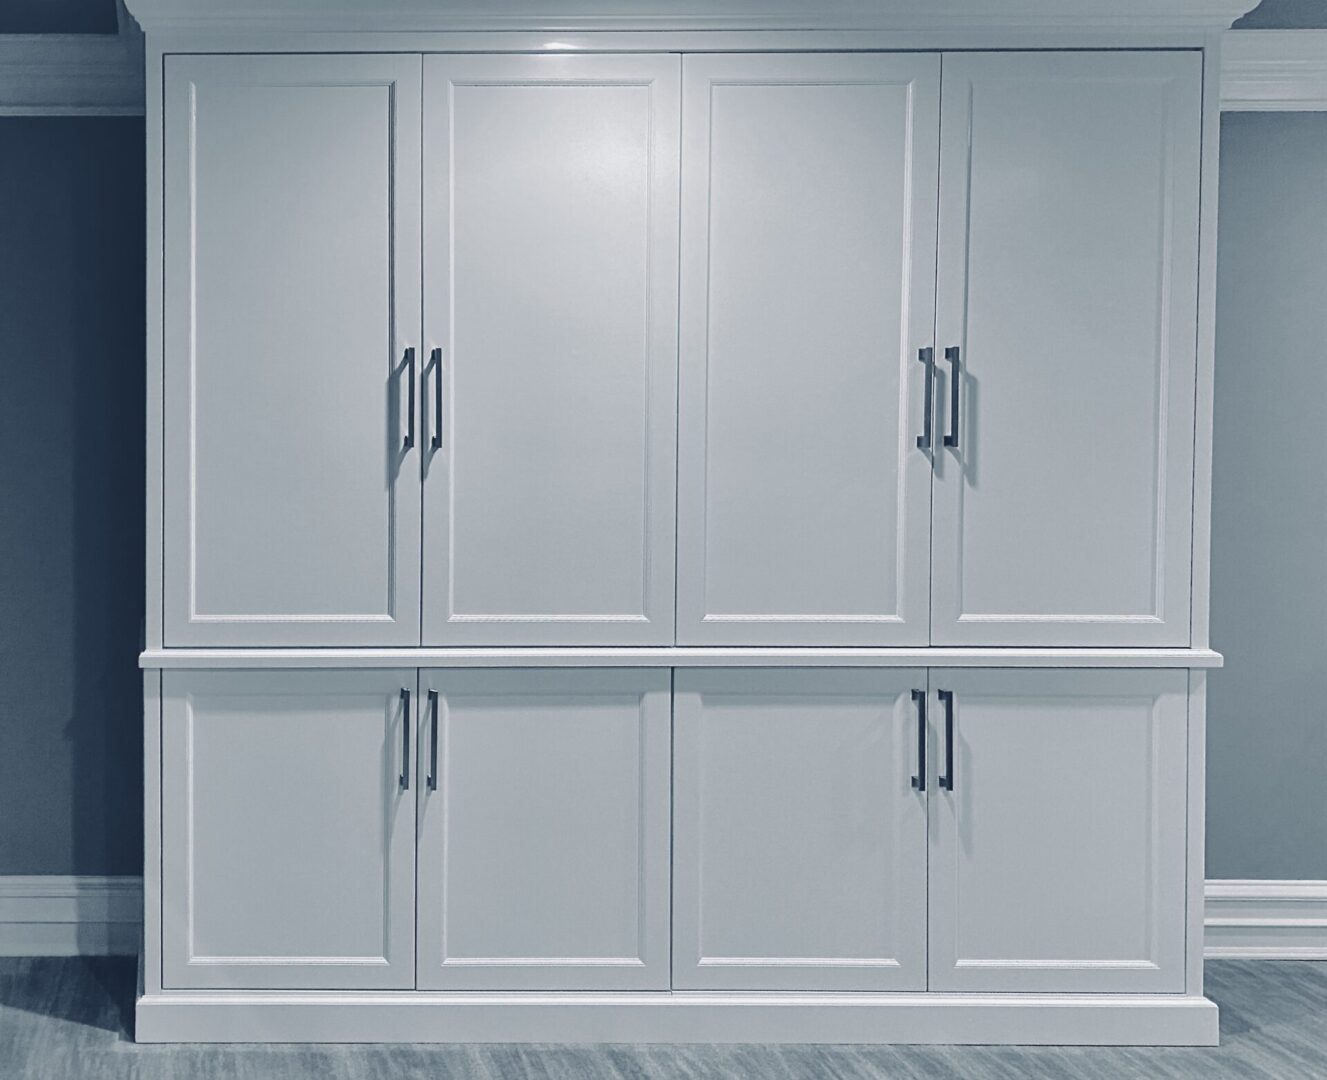 The front look of cabinets in white color